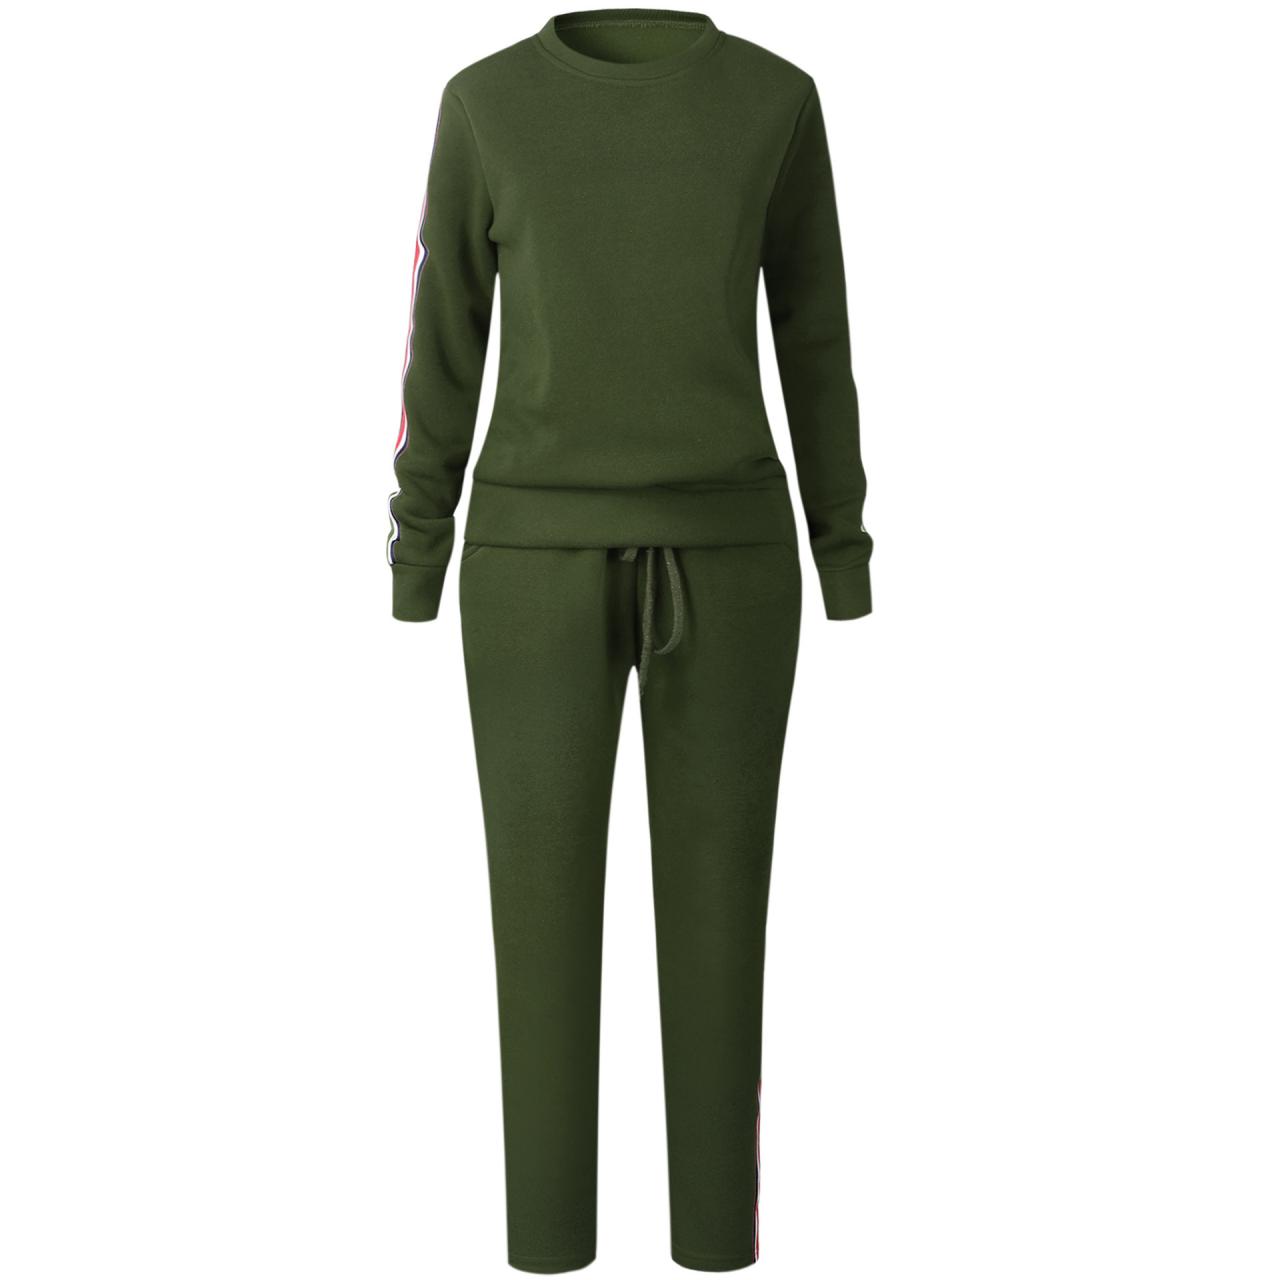 Women Tracksuit Casual Long Sleeve O-Neck Hoodies+Pants Striped Two Pieces Suit Sportwear army green